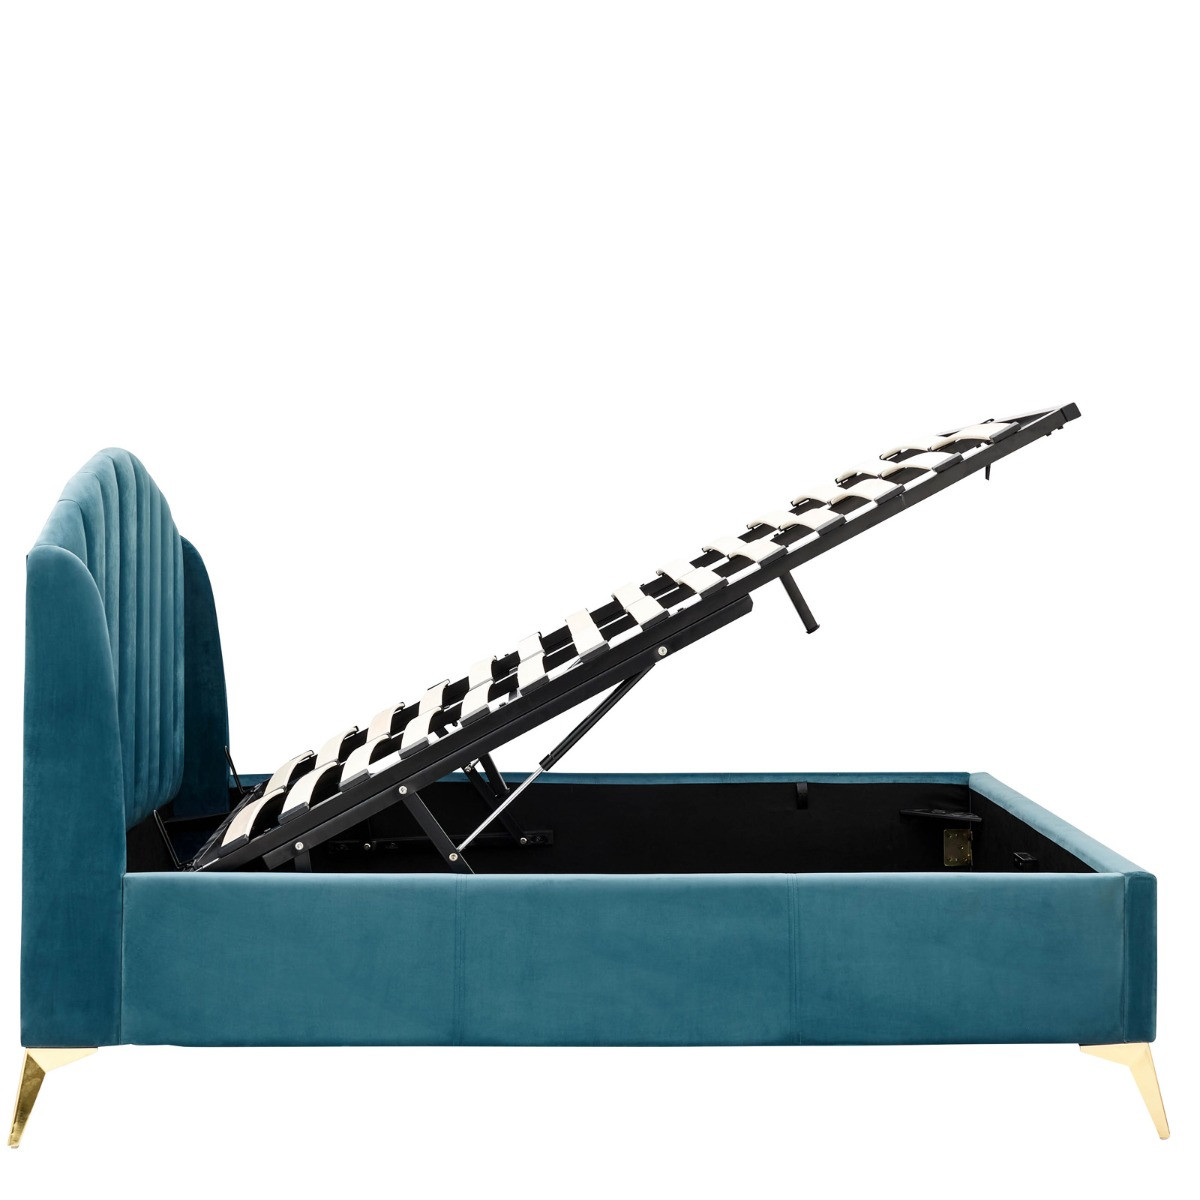 Pettine End Lift Ottoman Storage Bed, 5ft King - Teal>